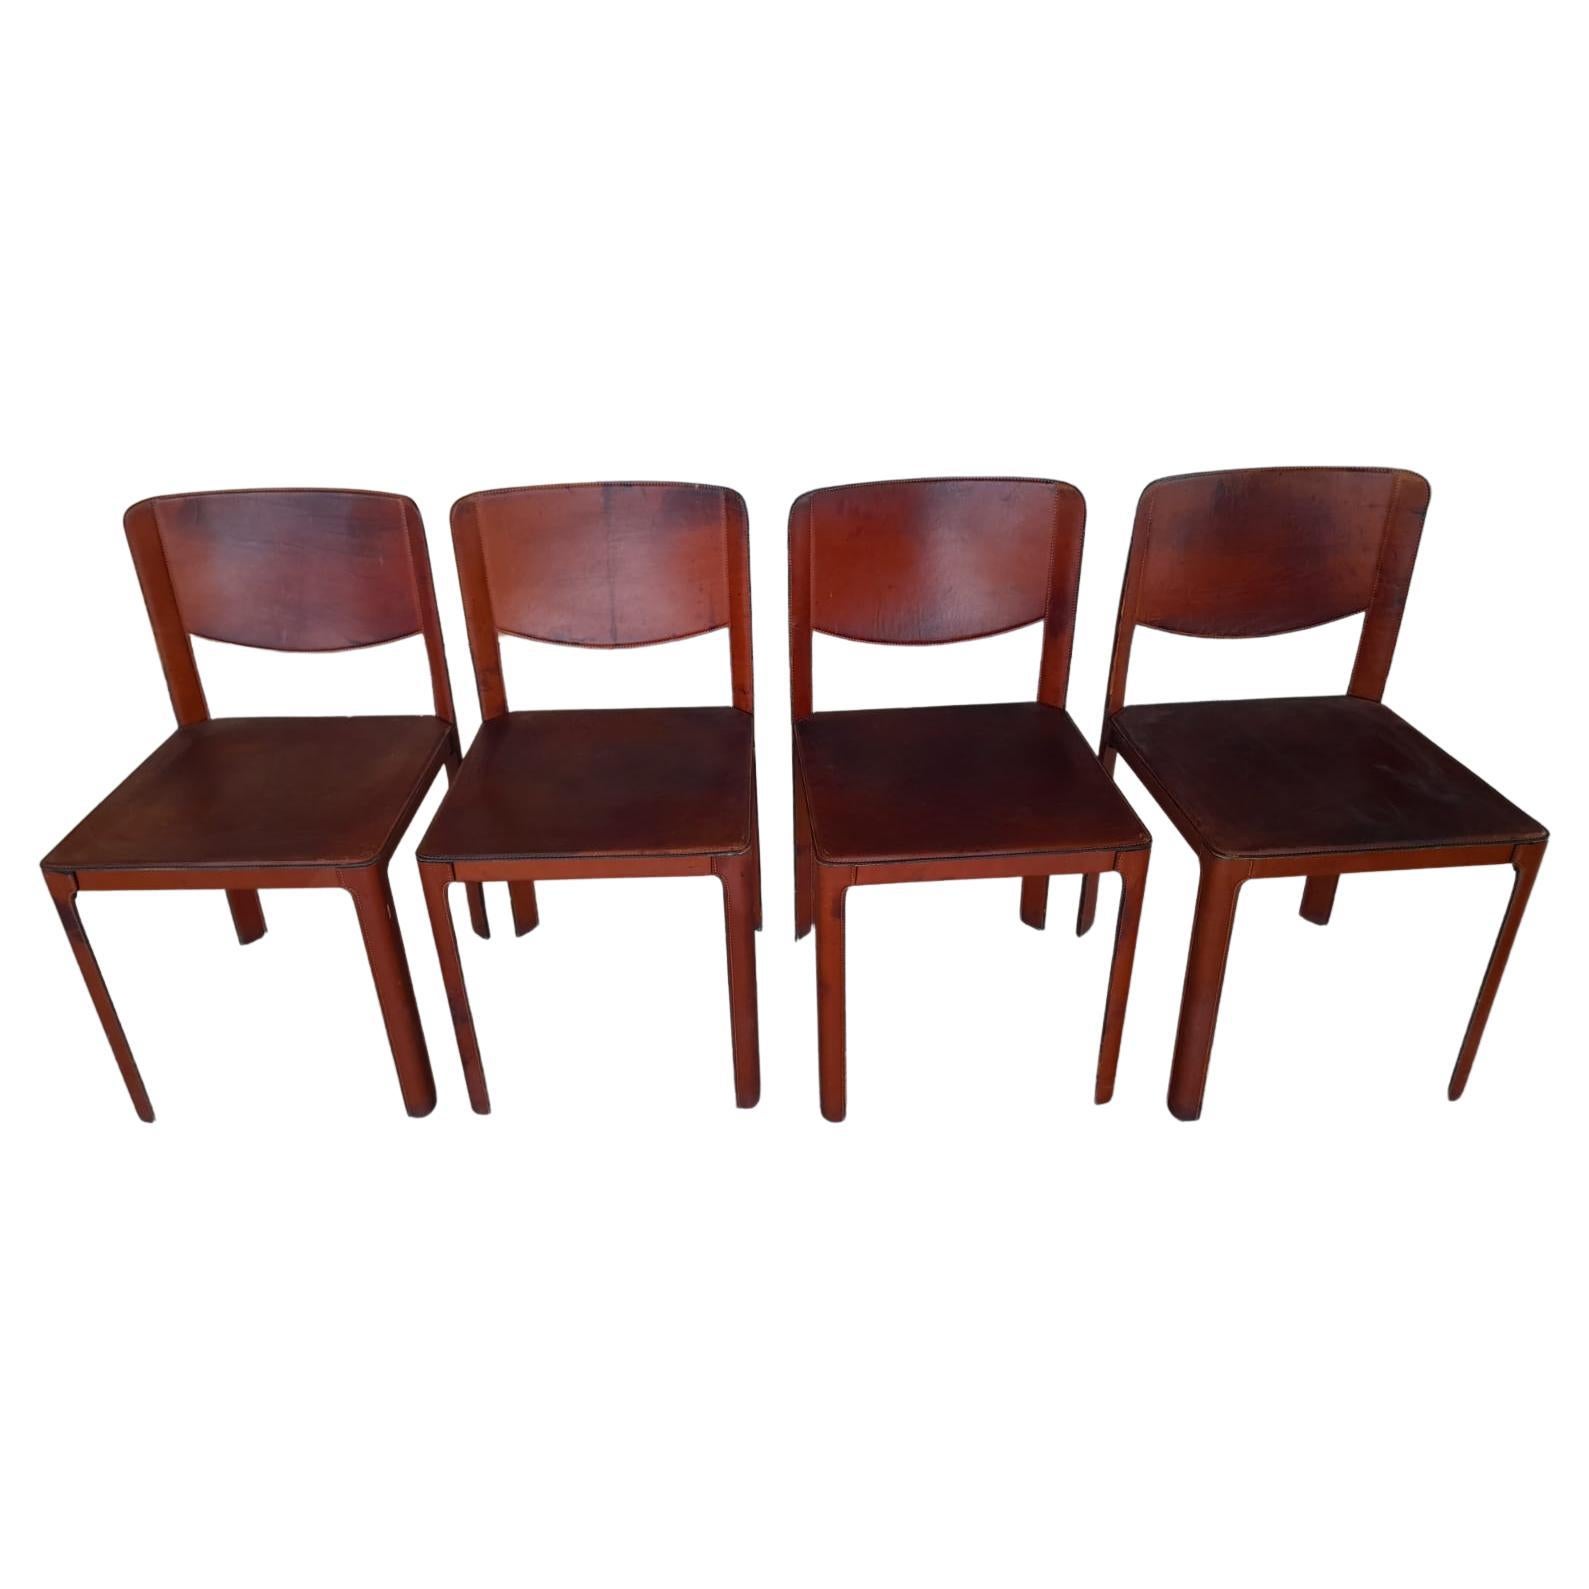 20th Century Grassi Red Leather Chairs Set of 4 For Sale